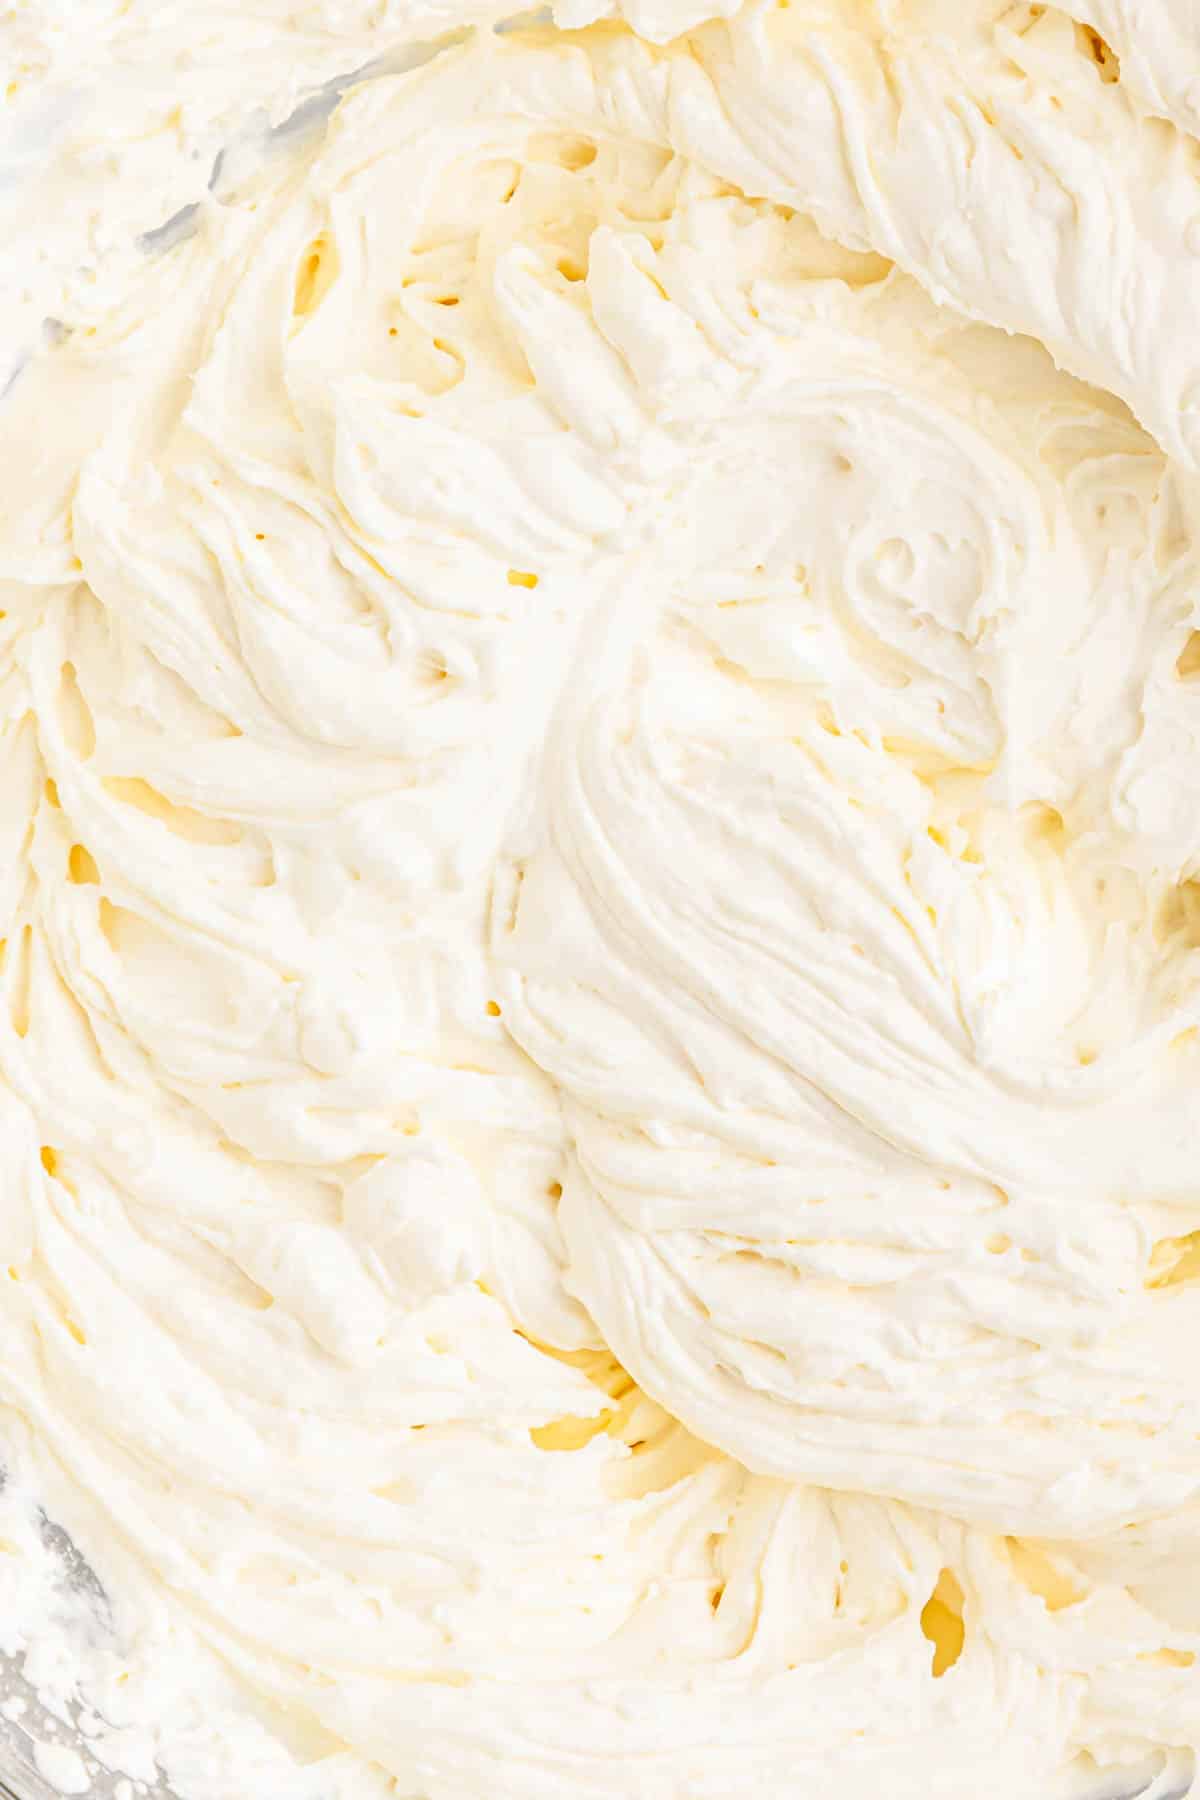 Whipped cream up close.